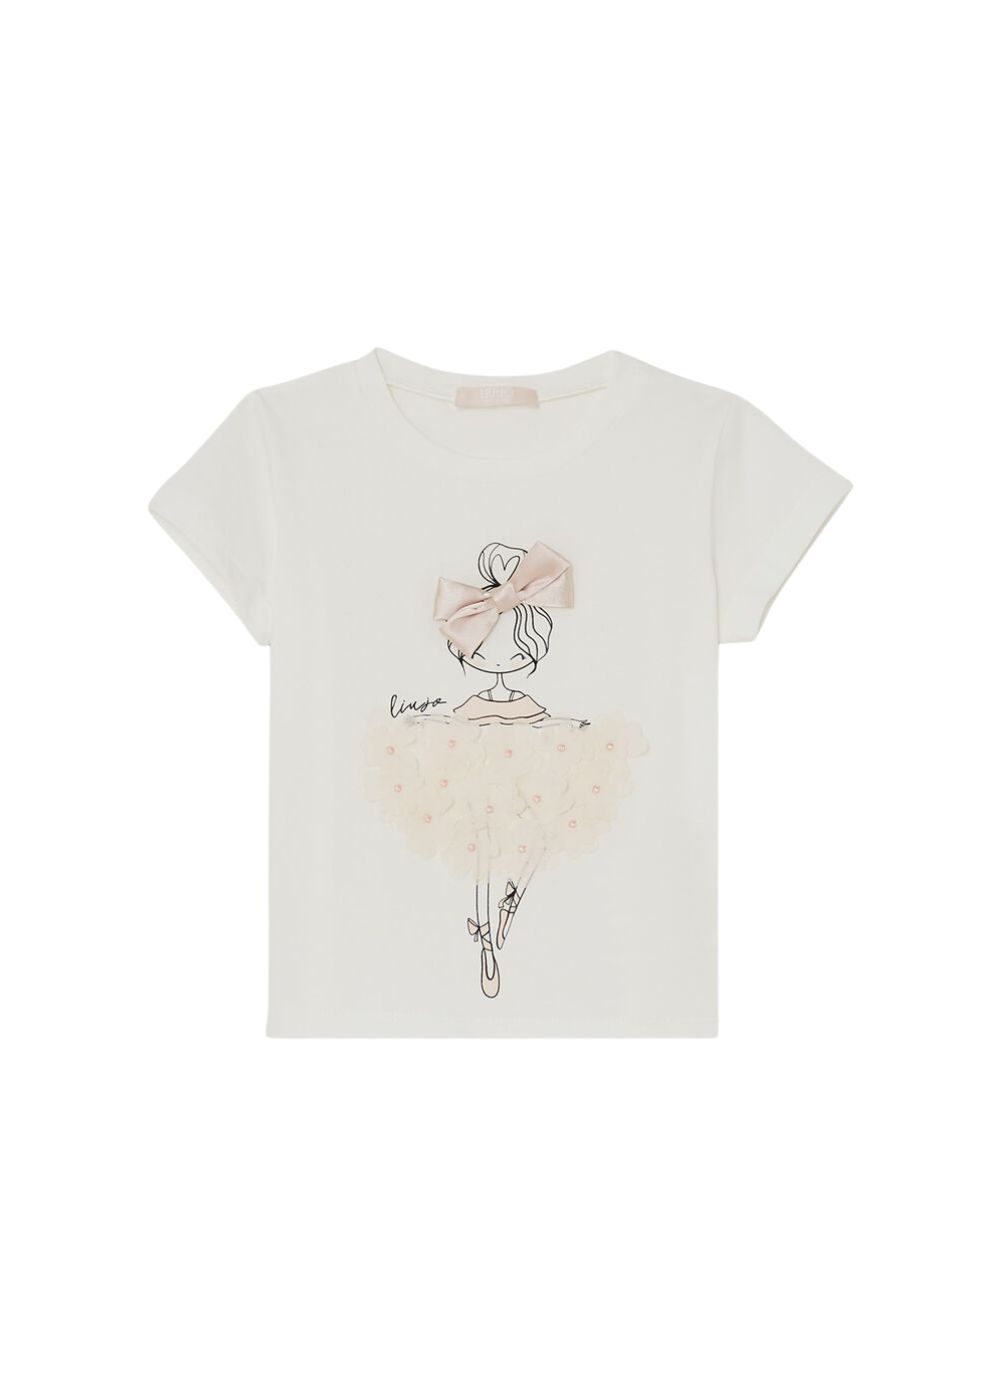 Featured image for “Liu Jo T-shirt Stampa Ballerina”